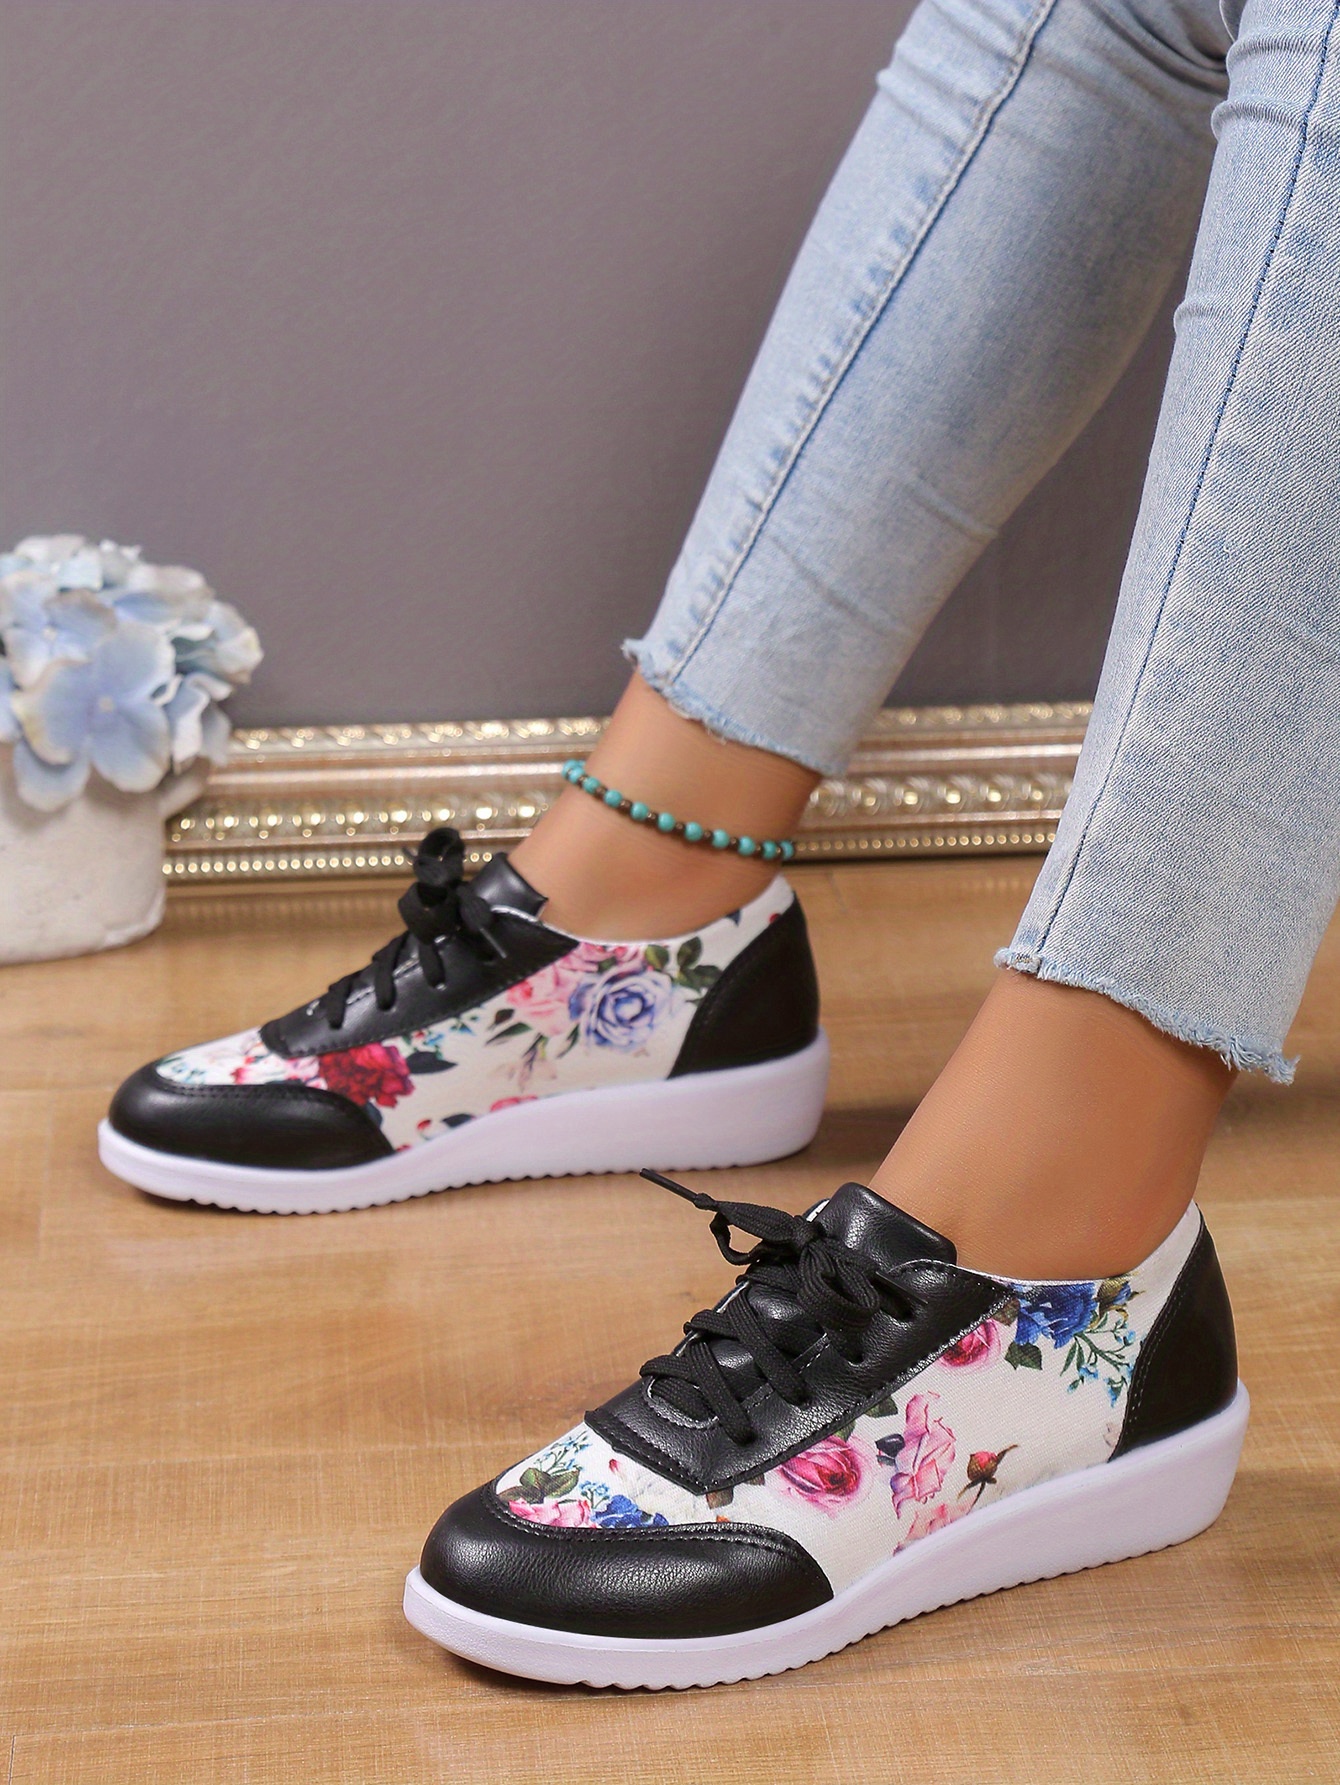 womens floral print sneakers lace up low top round toe non slip outdoor lightweight trainers casual versatile shoes details 7